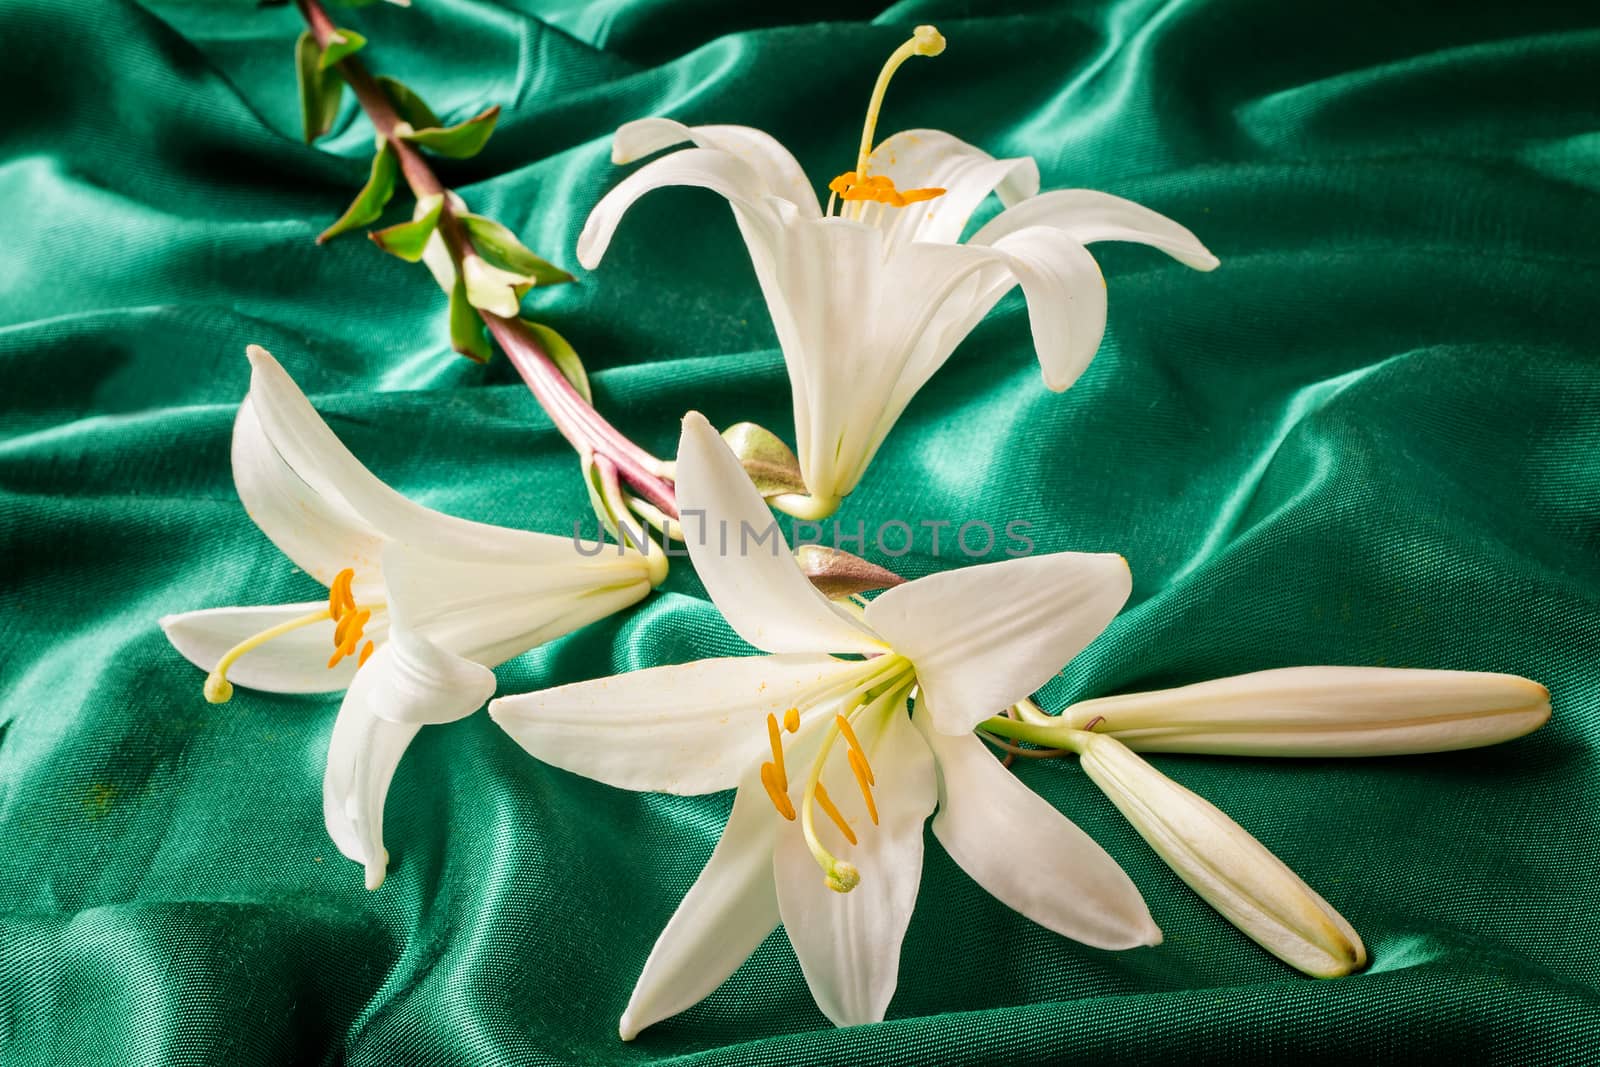 Large flowers of a white lily against green silk. Are presented by a close up